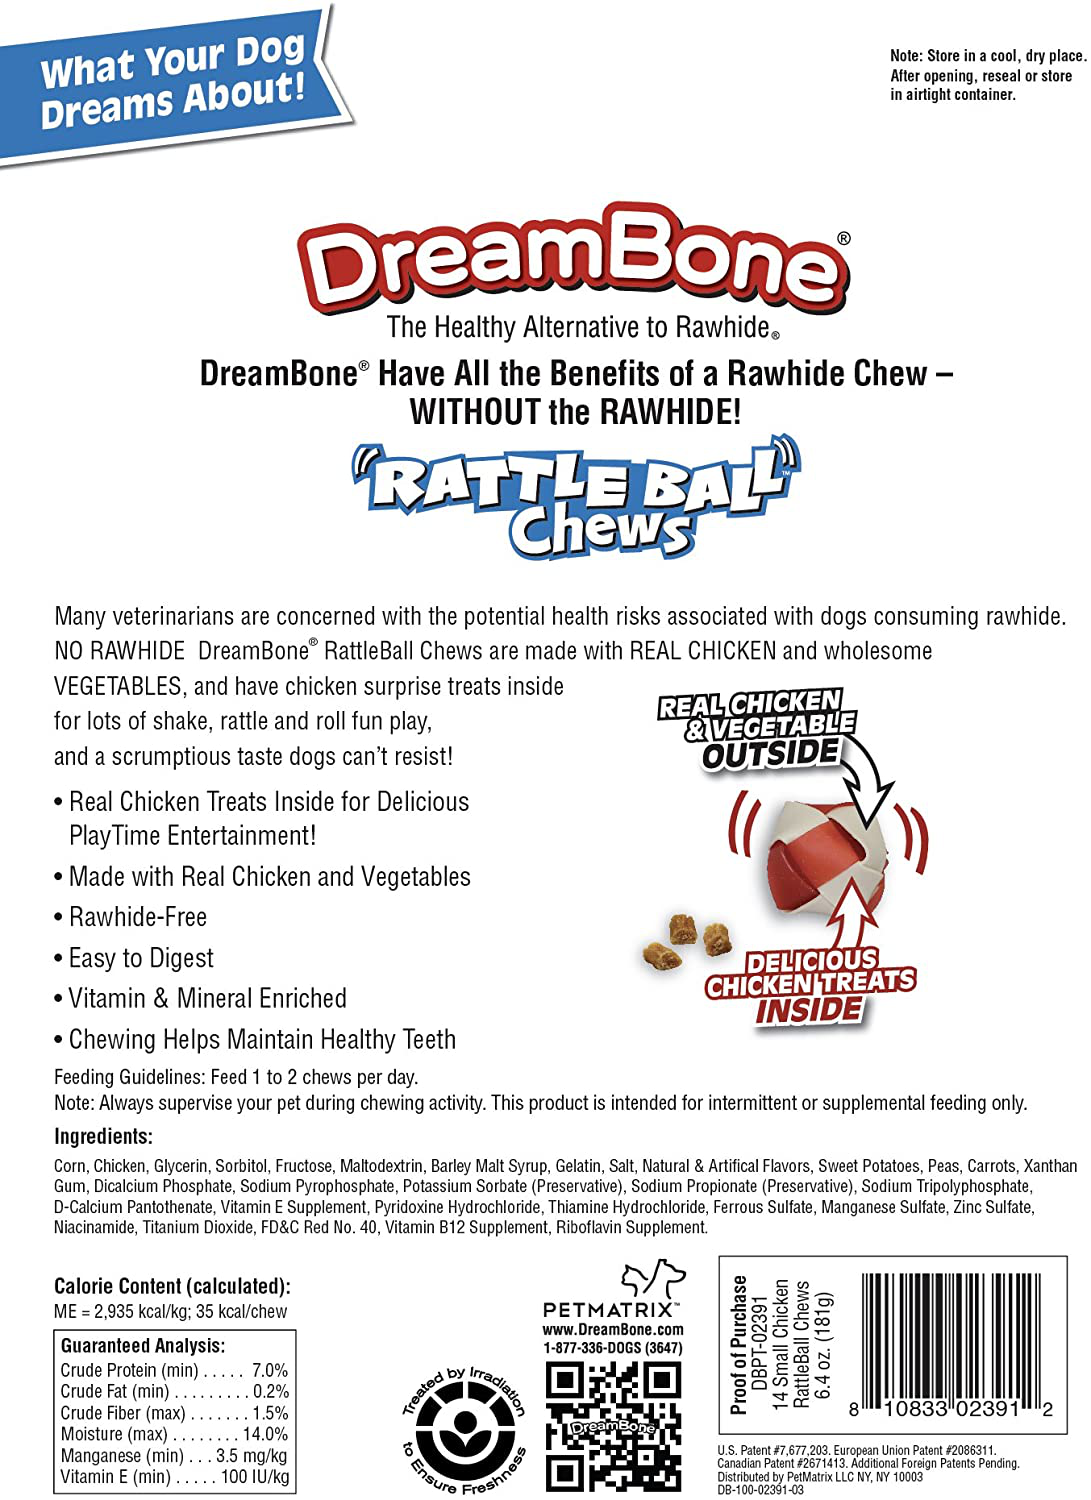 Dreambone Rattleball Small Chews 14 Count, Rawhide-Free Chews for Dogs, with Real Chicken Treats Inside Animals & Pet Supplies > Pet Supplies > Dog Supplies > Dog Treats DreamBone   